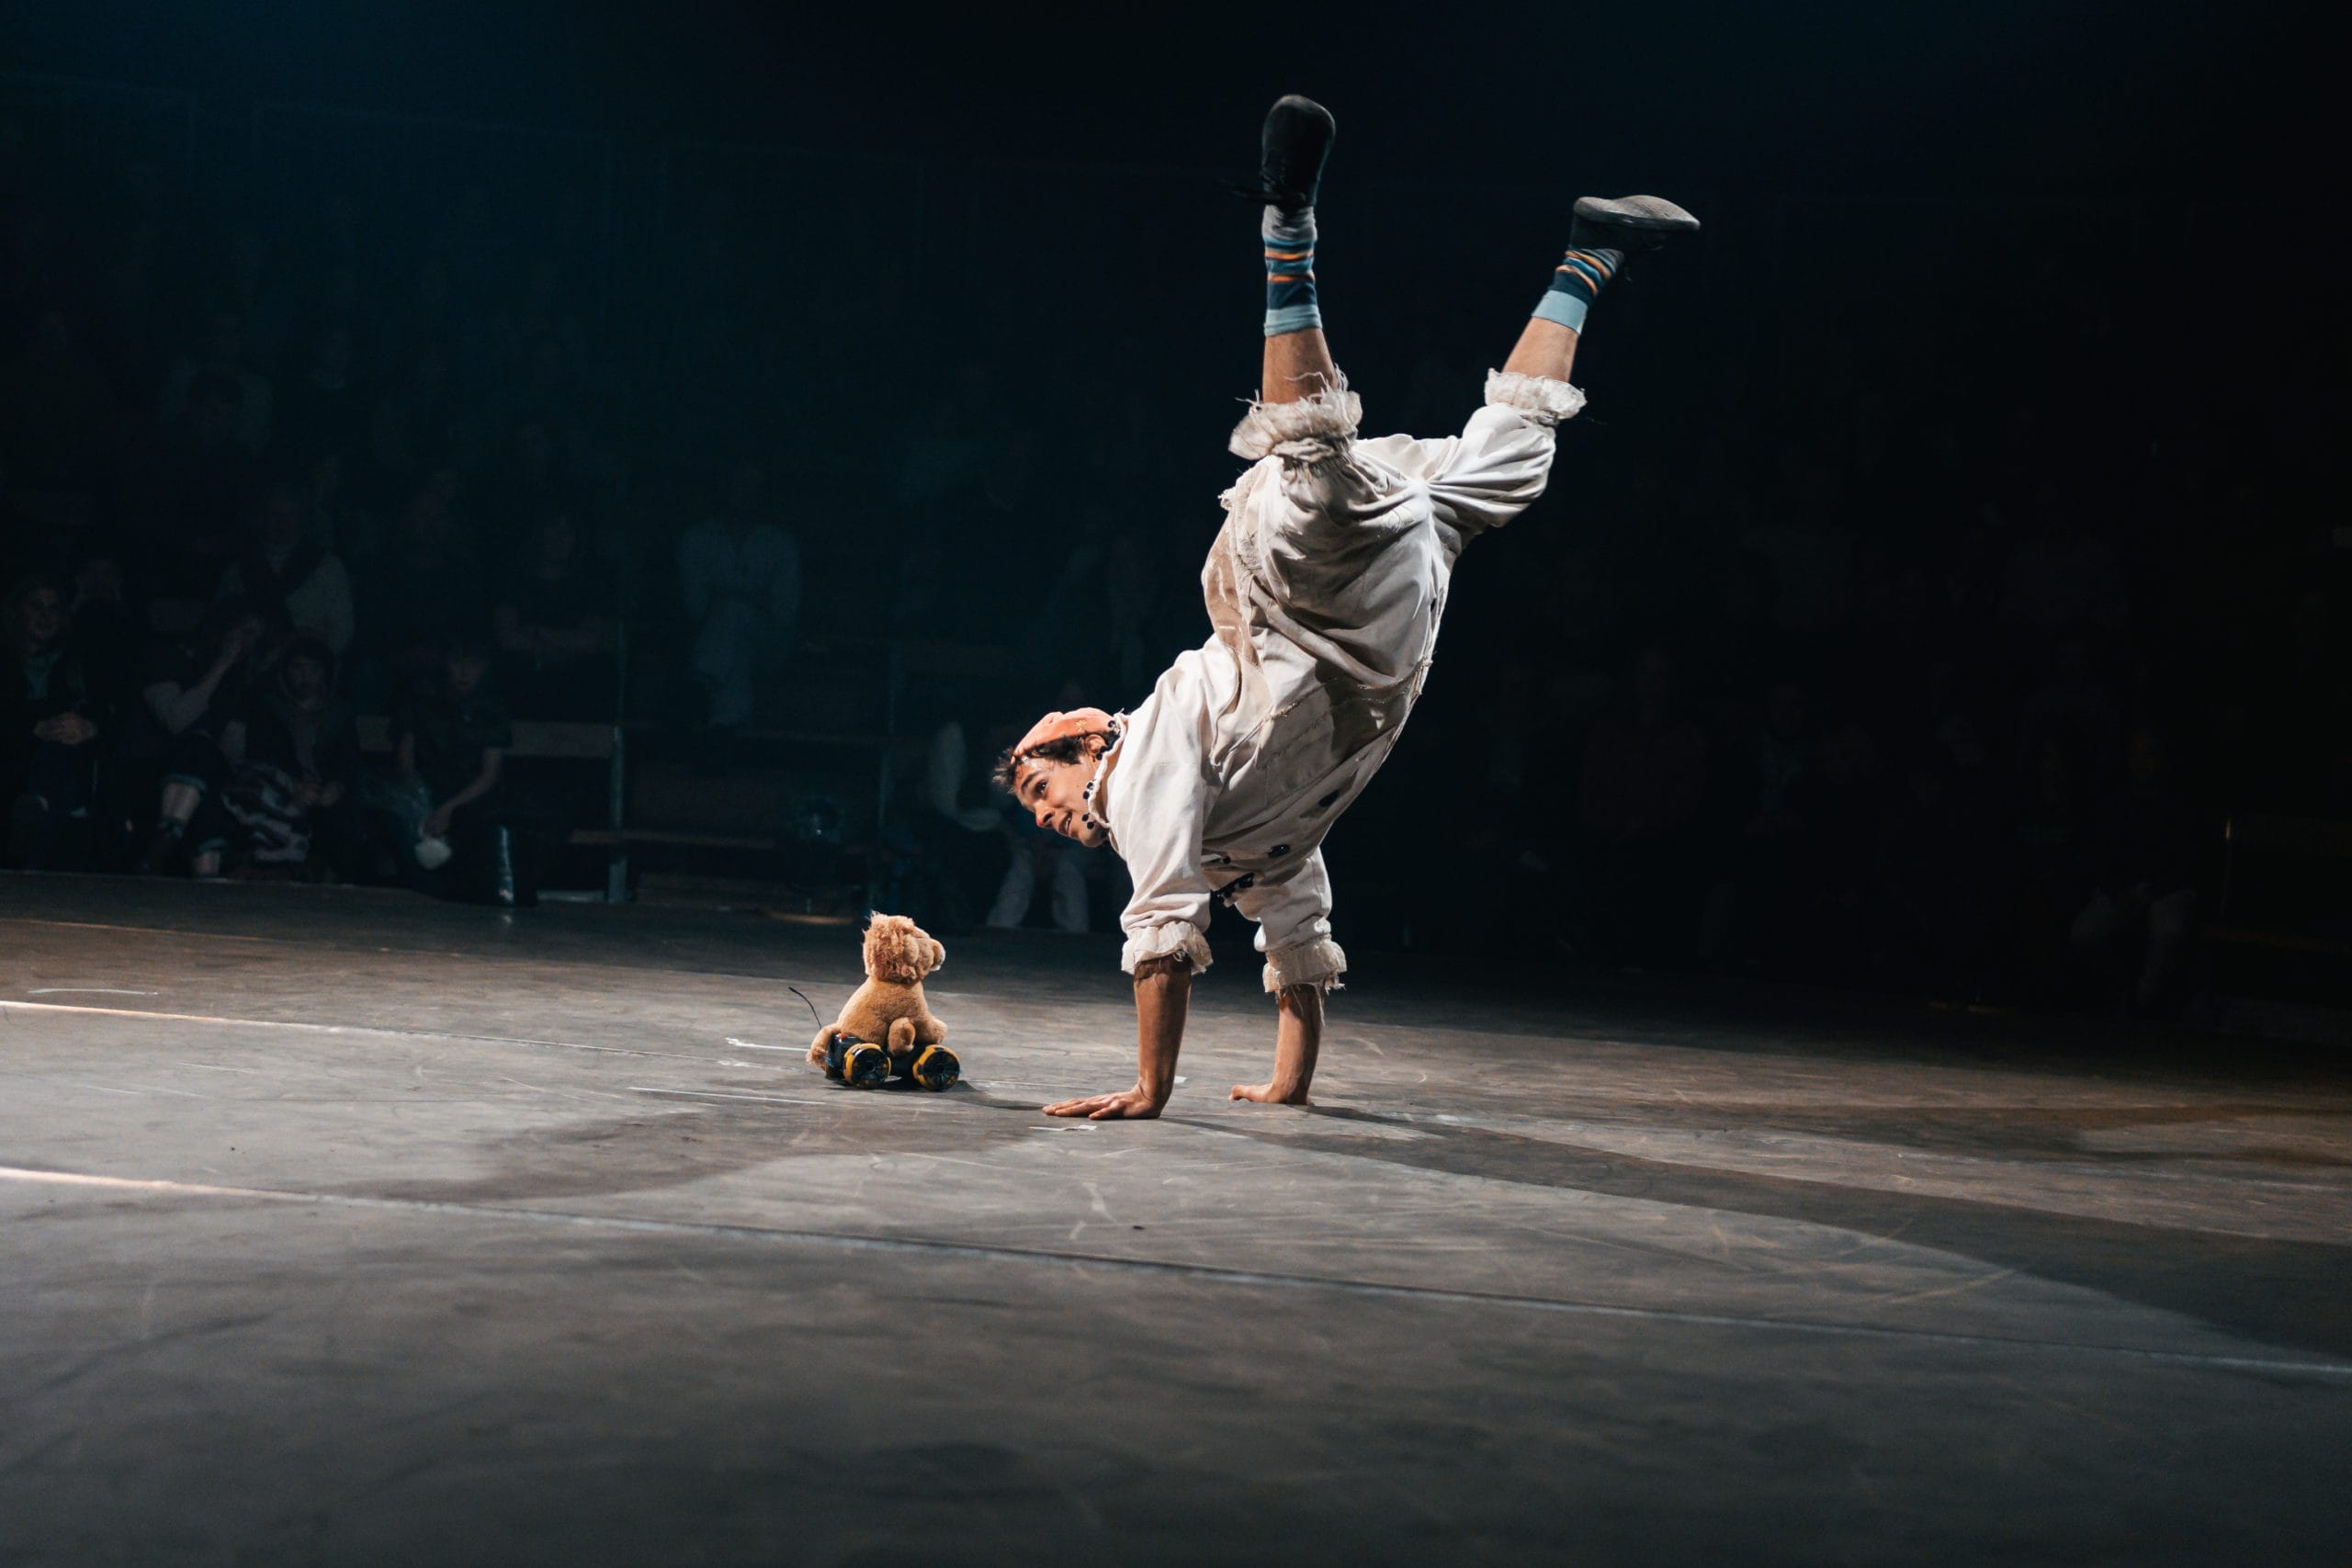 A performer engages in a handstand. They are wearing an oversized contemporary clown costume. On the ground next to them is a remote controlled robot, part of the act.